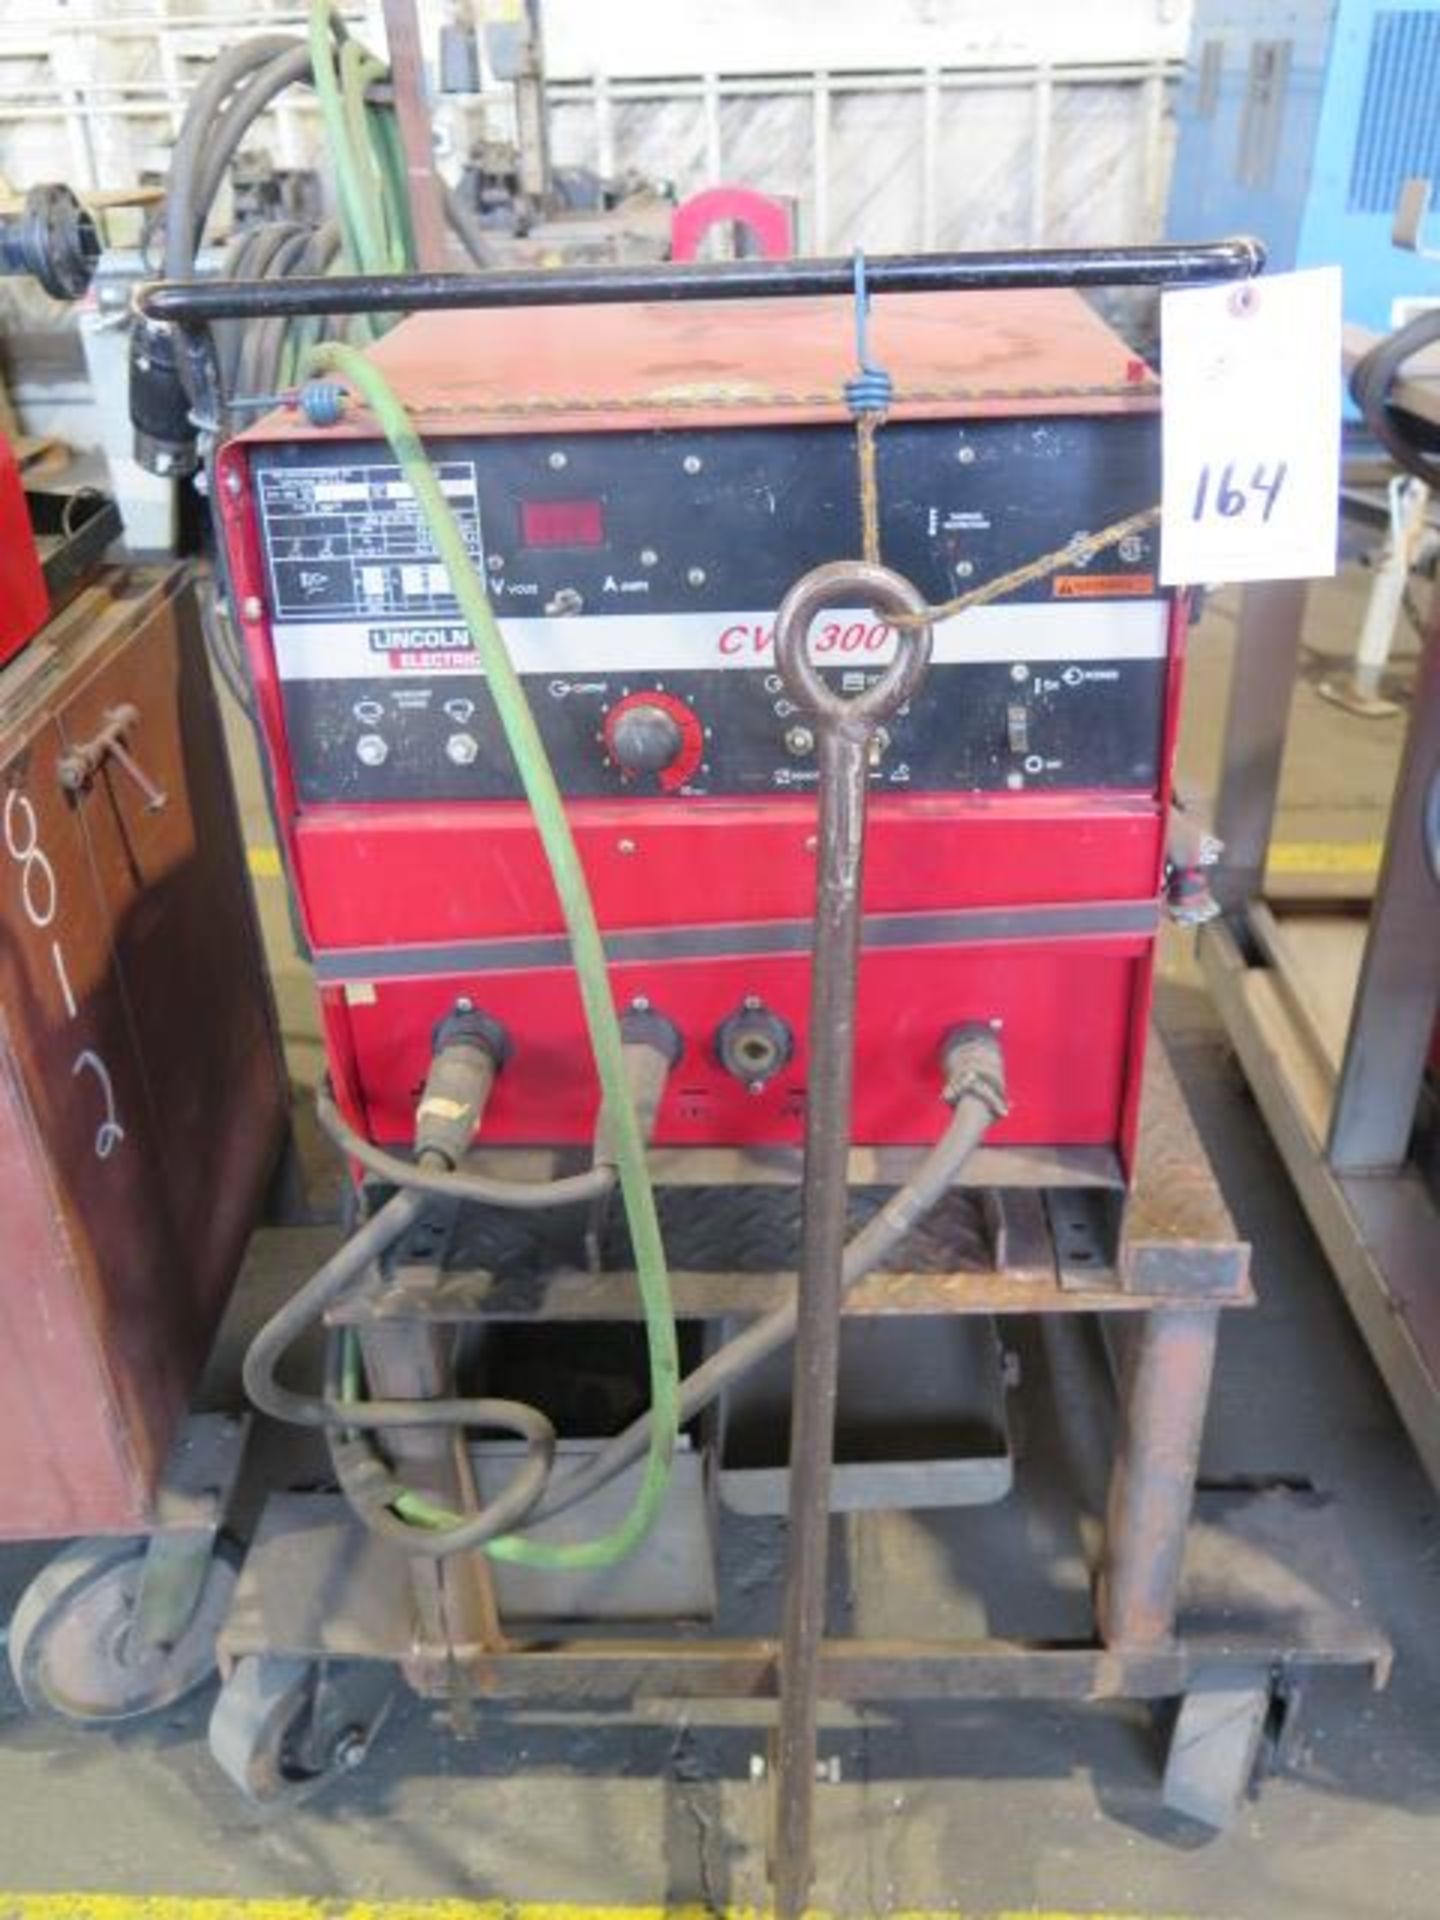 Lincoln CV-300 Arc Welding Power Source w/ Lincoln LF-74 Wire Feeder (SOLD AS-IS - NO WARRANTY)